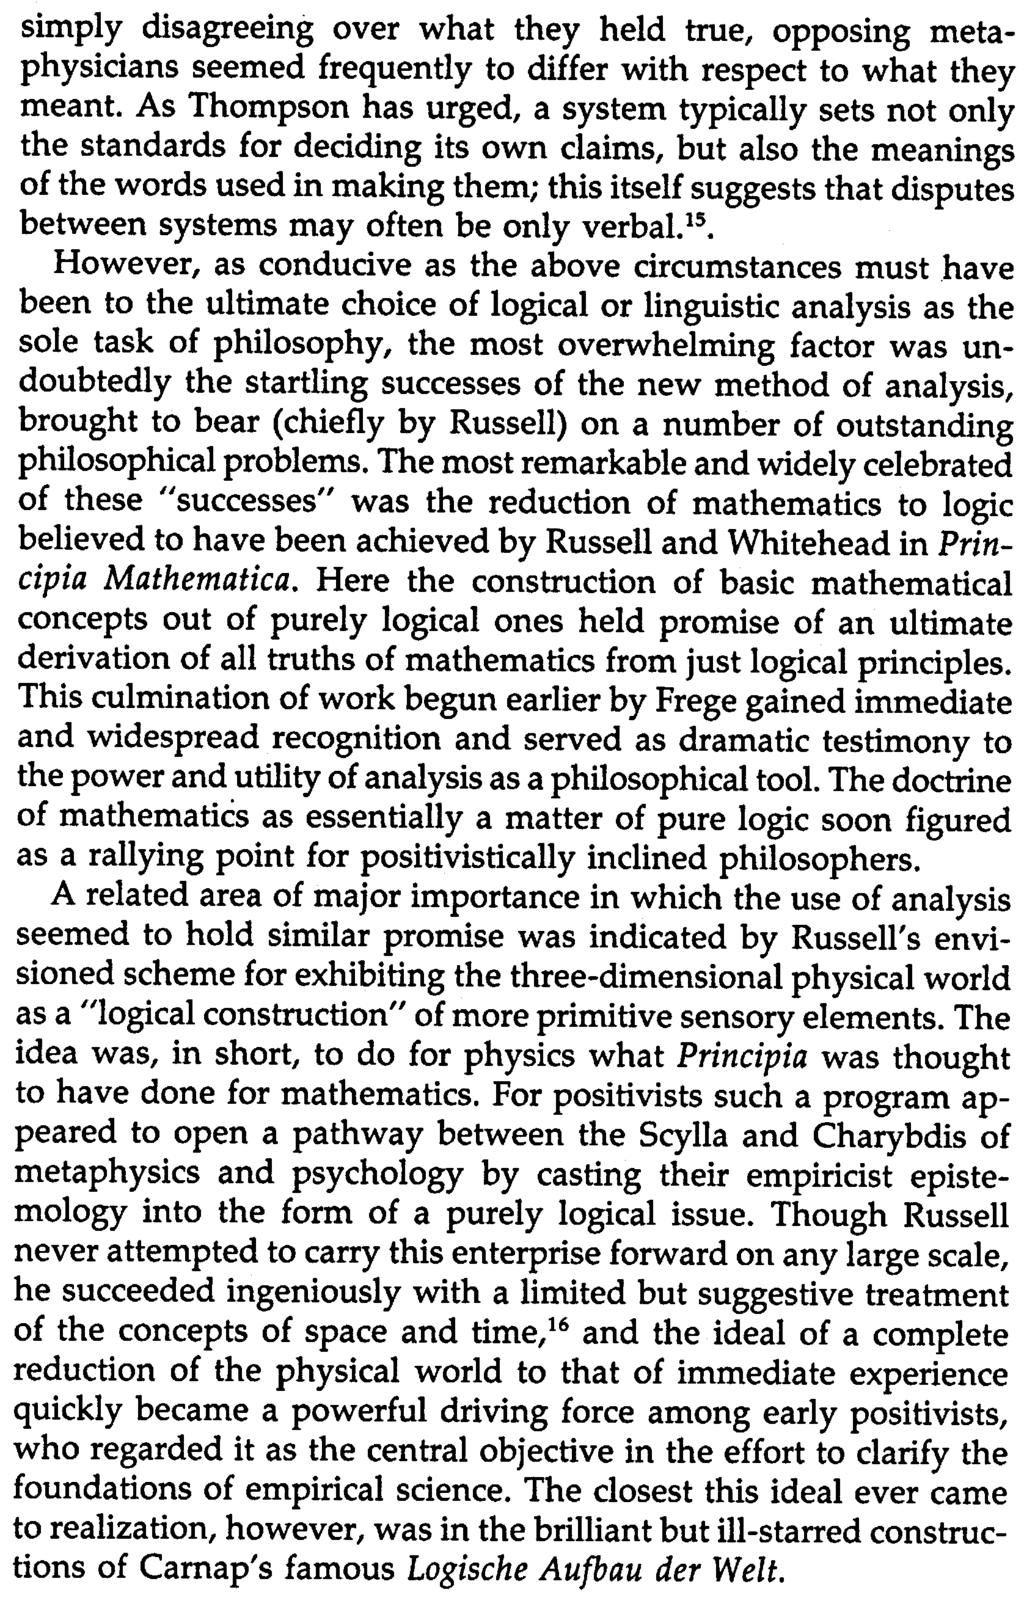 8 Quine and Analytic Philosophy simply disagreeing over what they held true, opposing metaphysicians seemed frequently to differ with respect to what they meant.